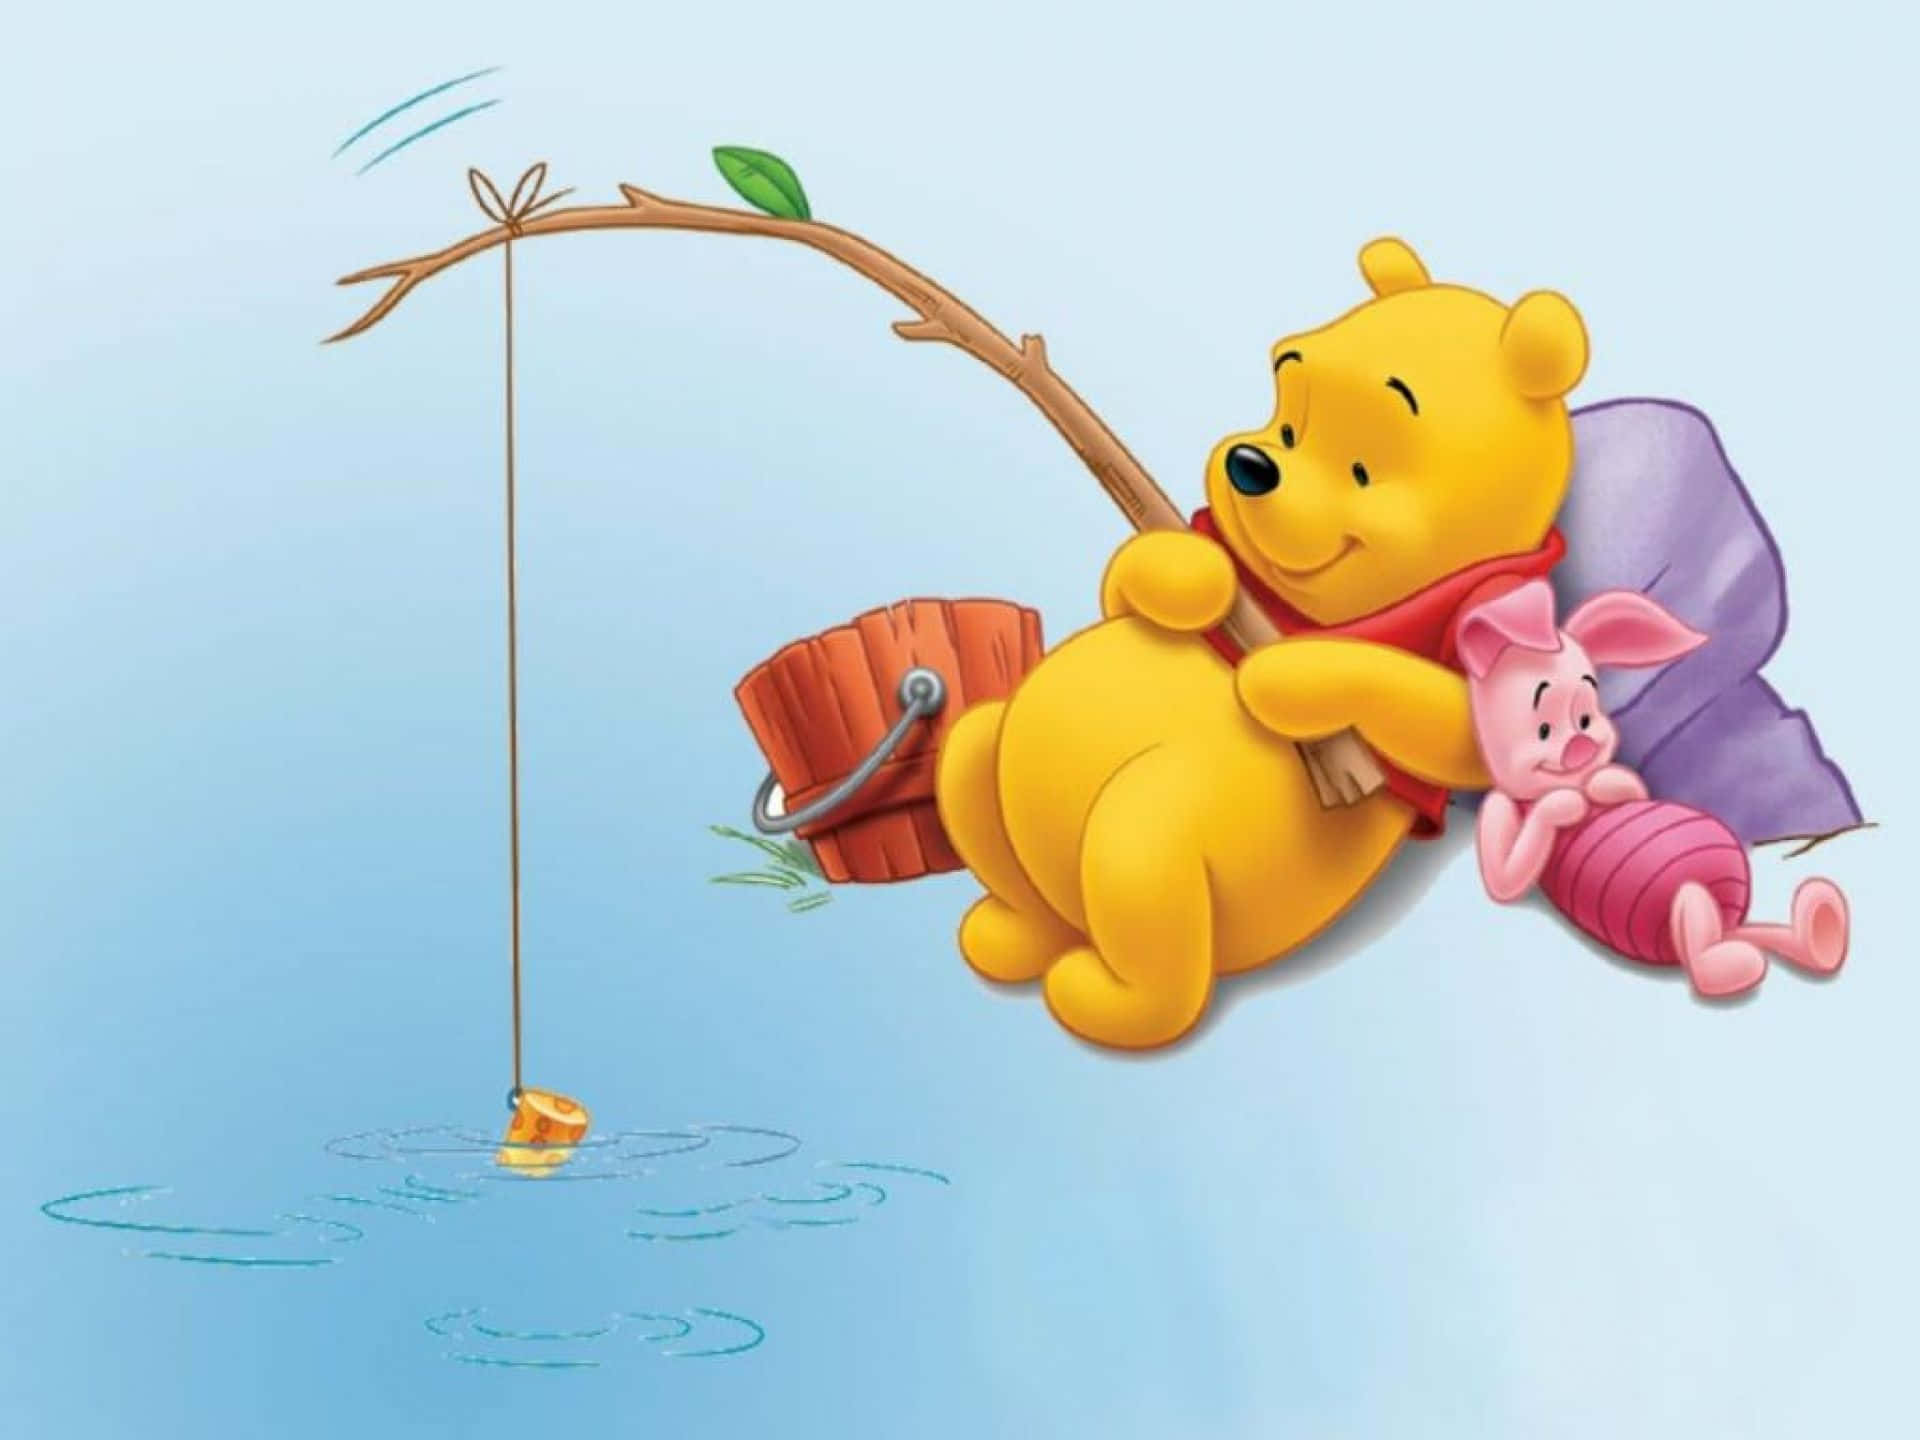 "Winnie The Pooh and the Hundred Acre Wood"